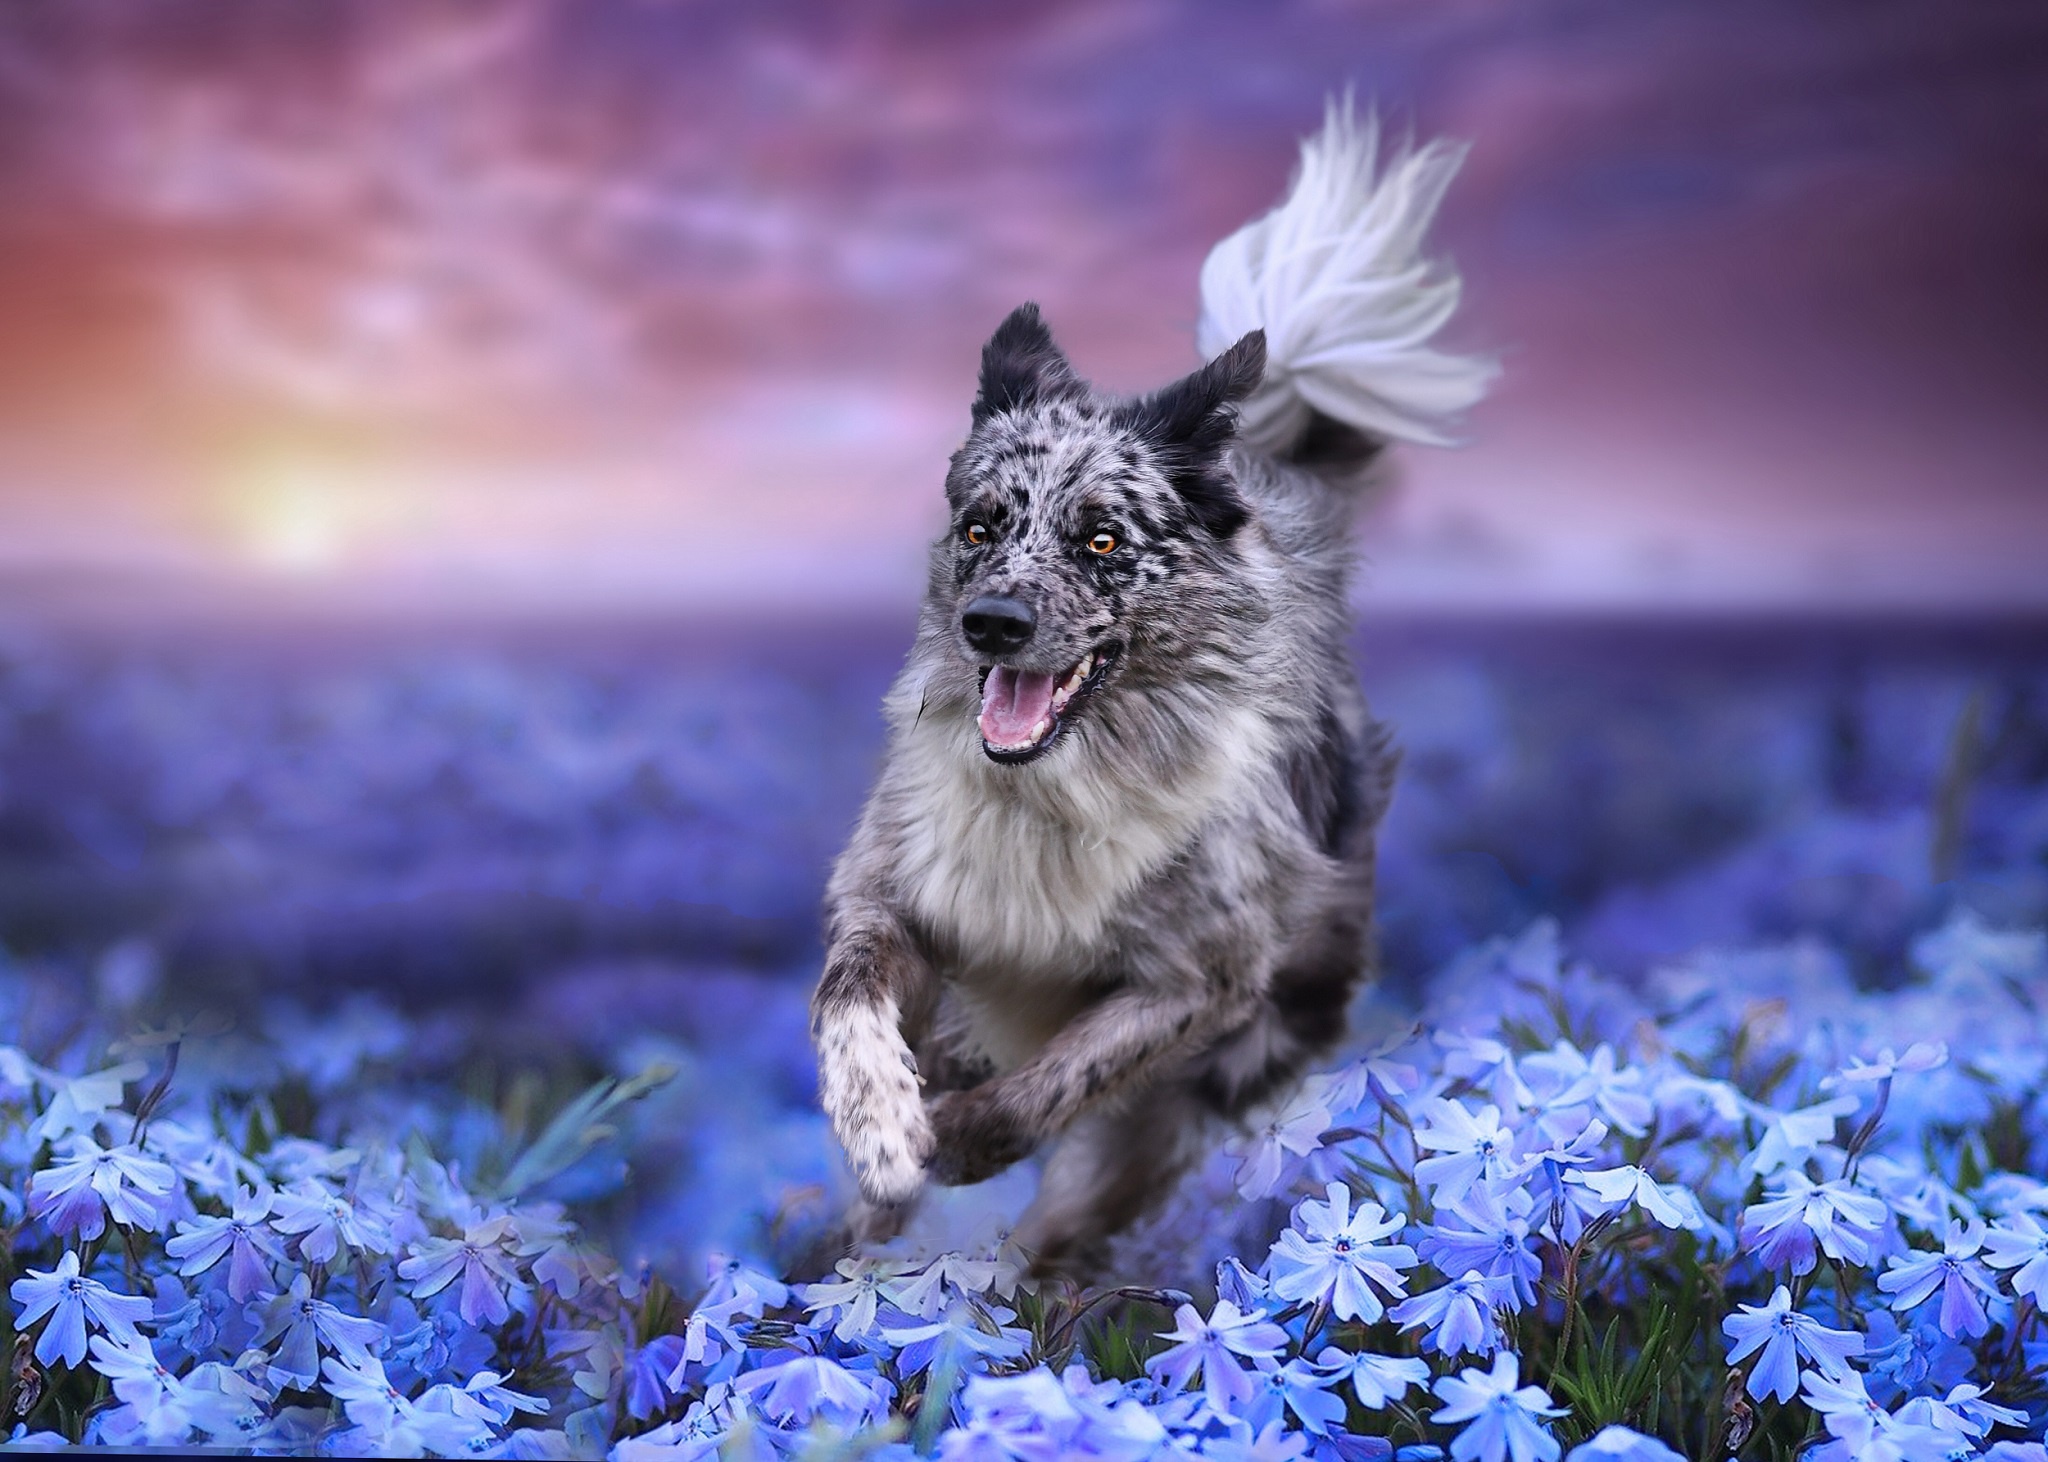 General 2048x1462 nature colorful dog plants flowers animals